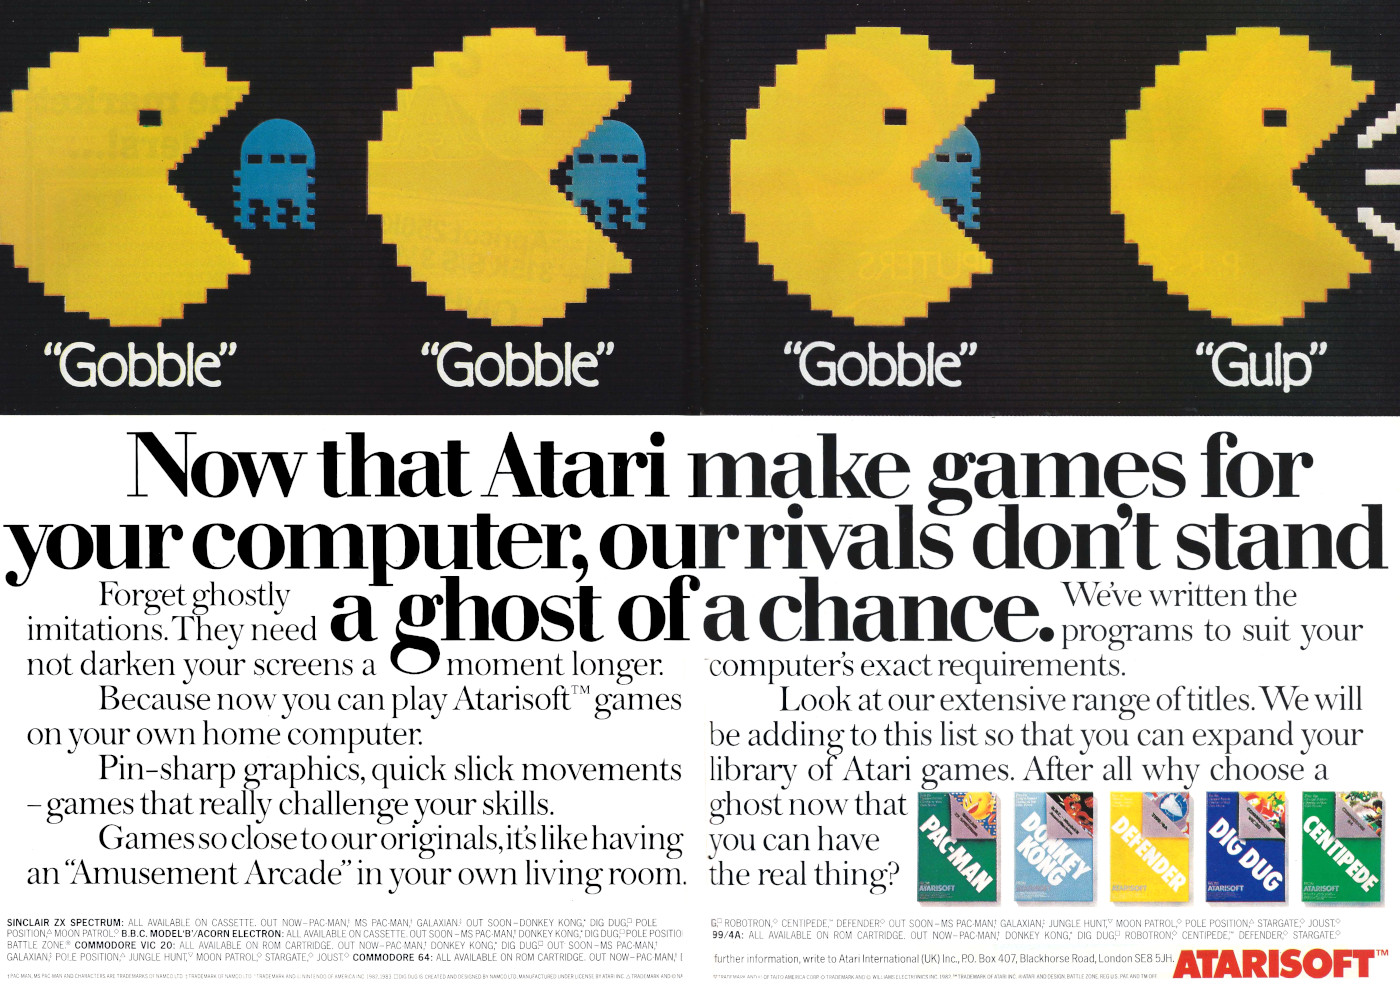 An advert from Atarisoft, which features a dig at clones of the company's games, like Commodore's version of Pac-Man, which it called <span class='hilite'>Jelly Monsters</span> after legal pressure from Atari. From Personal Computer World, March 1984